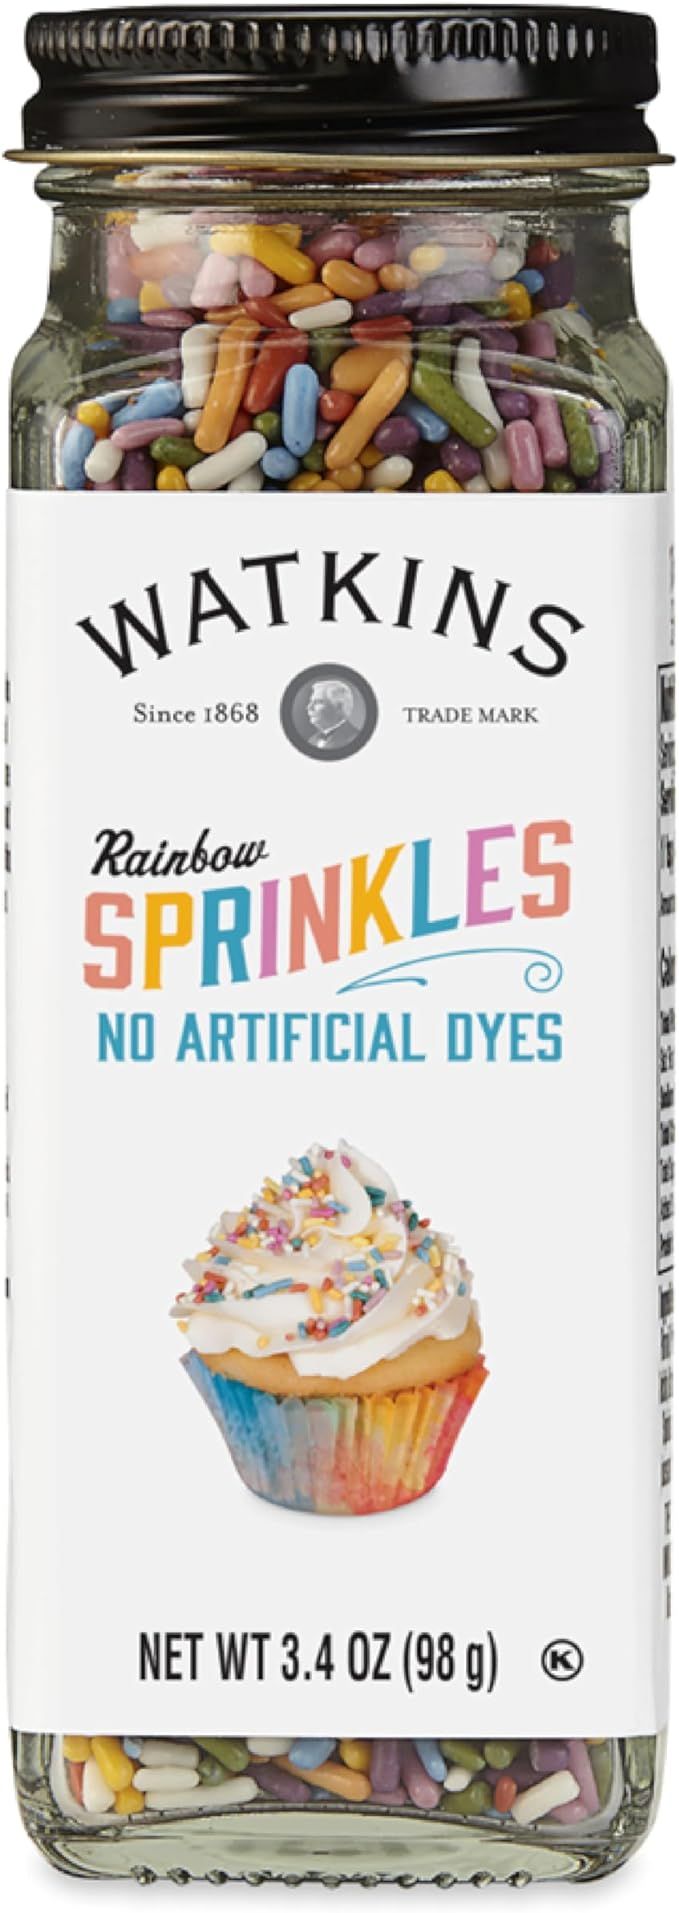 Watkins Rainbow Decorating Sprinkles, No Artificial Dyes, Kosher, 3.4 Ounce Jar, 1-Pack | Amazon (US)